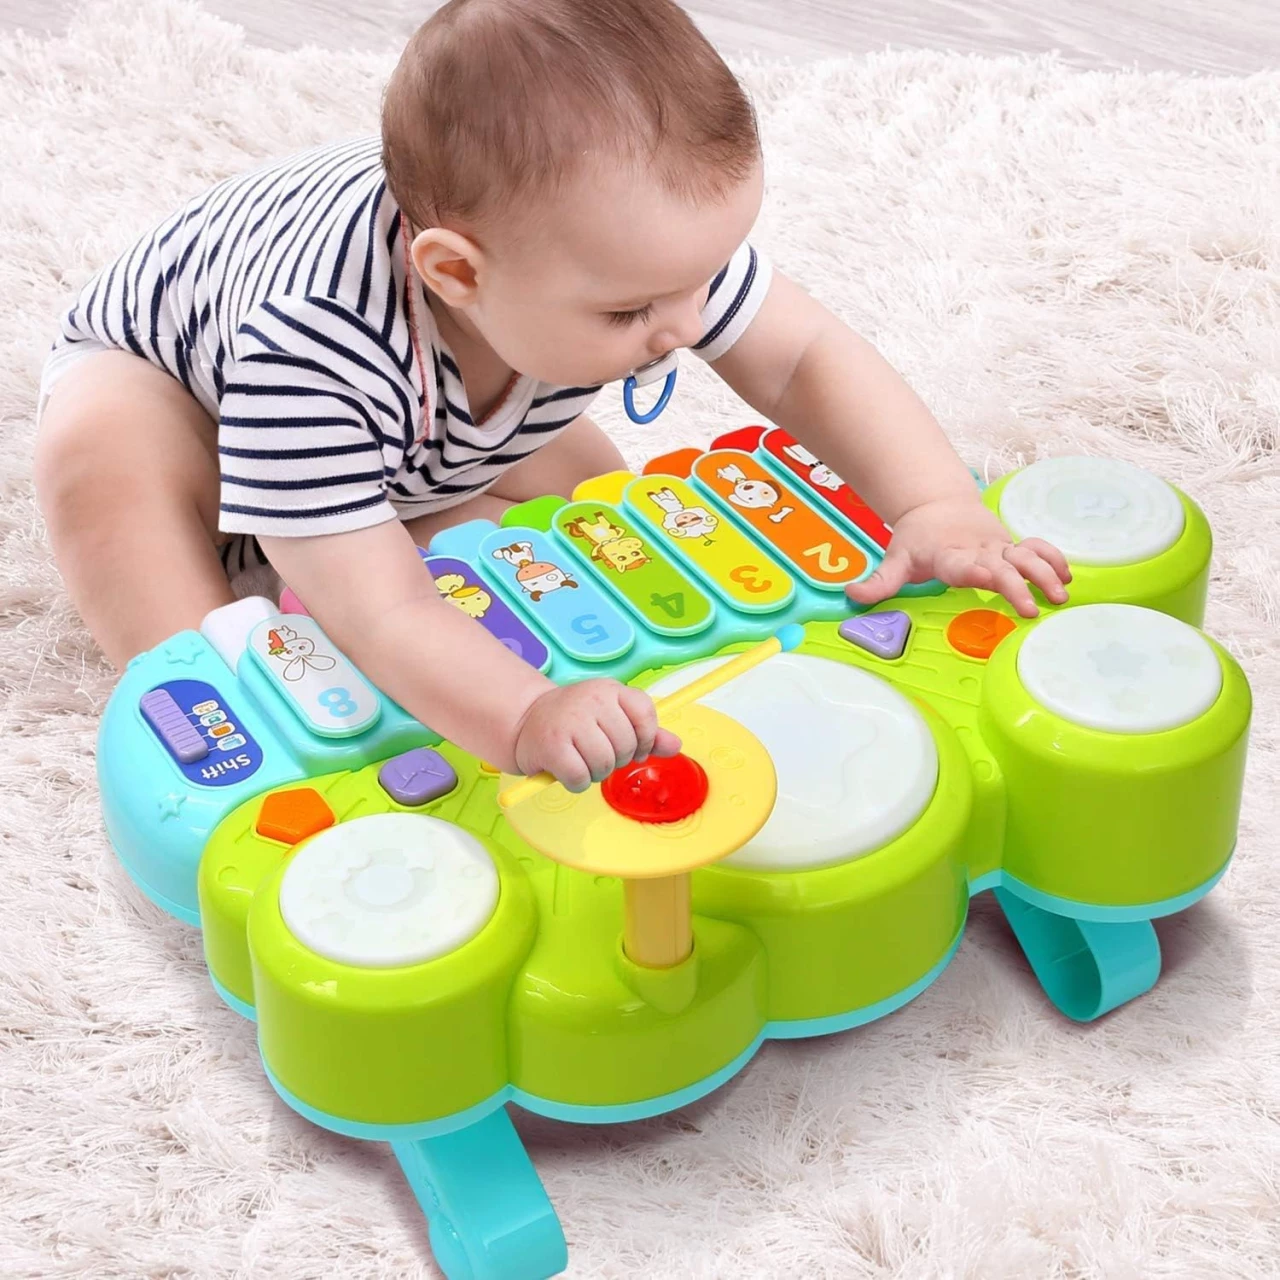 Xylophone Table Music Toys of Ohuhu, Multi-Function Toys Kids Drum Set